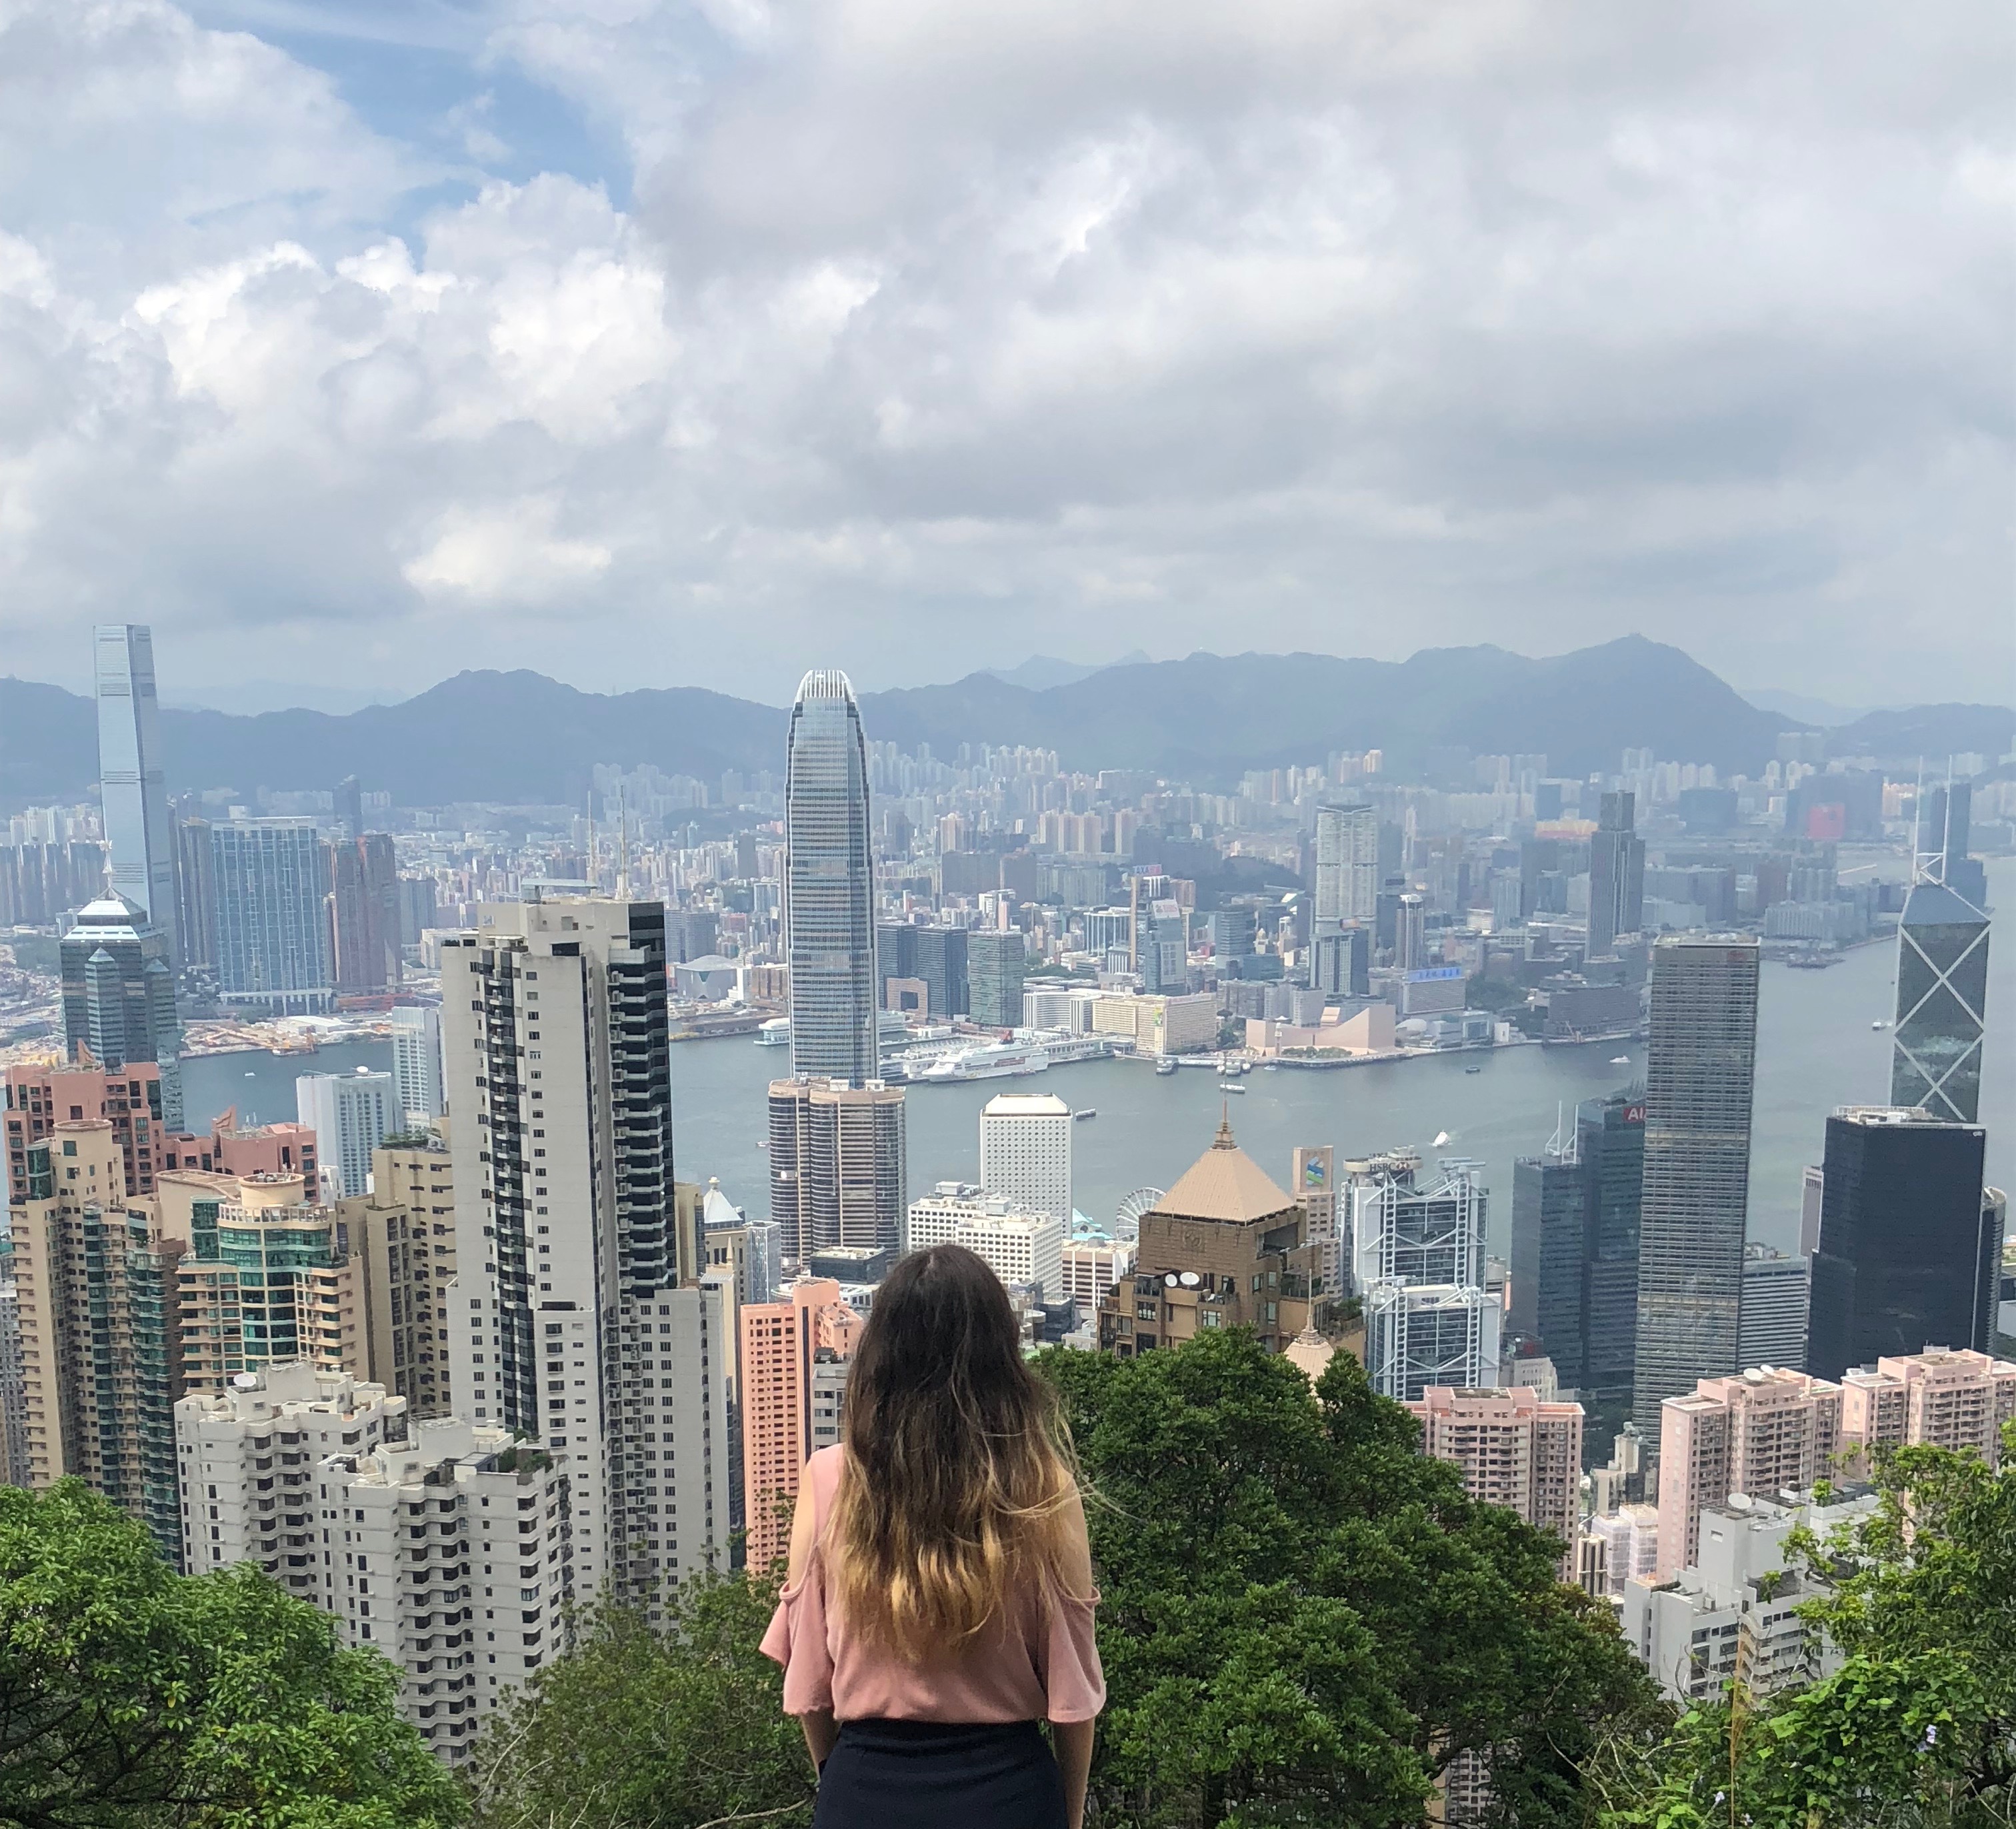 Saera looking over the skyscrapers in Hong Kong